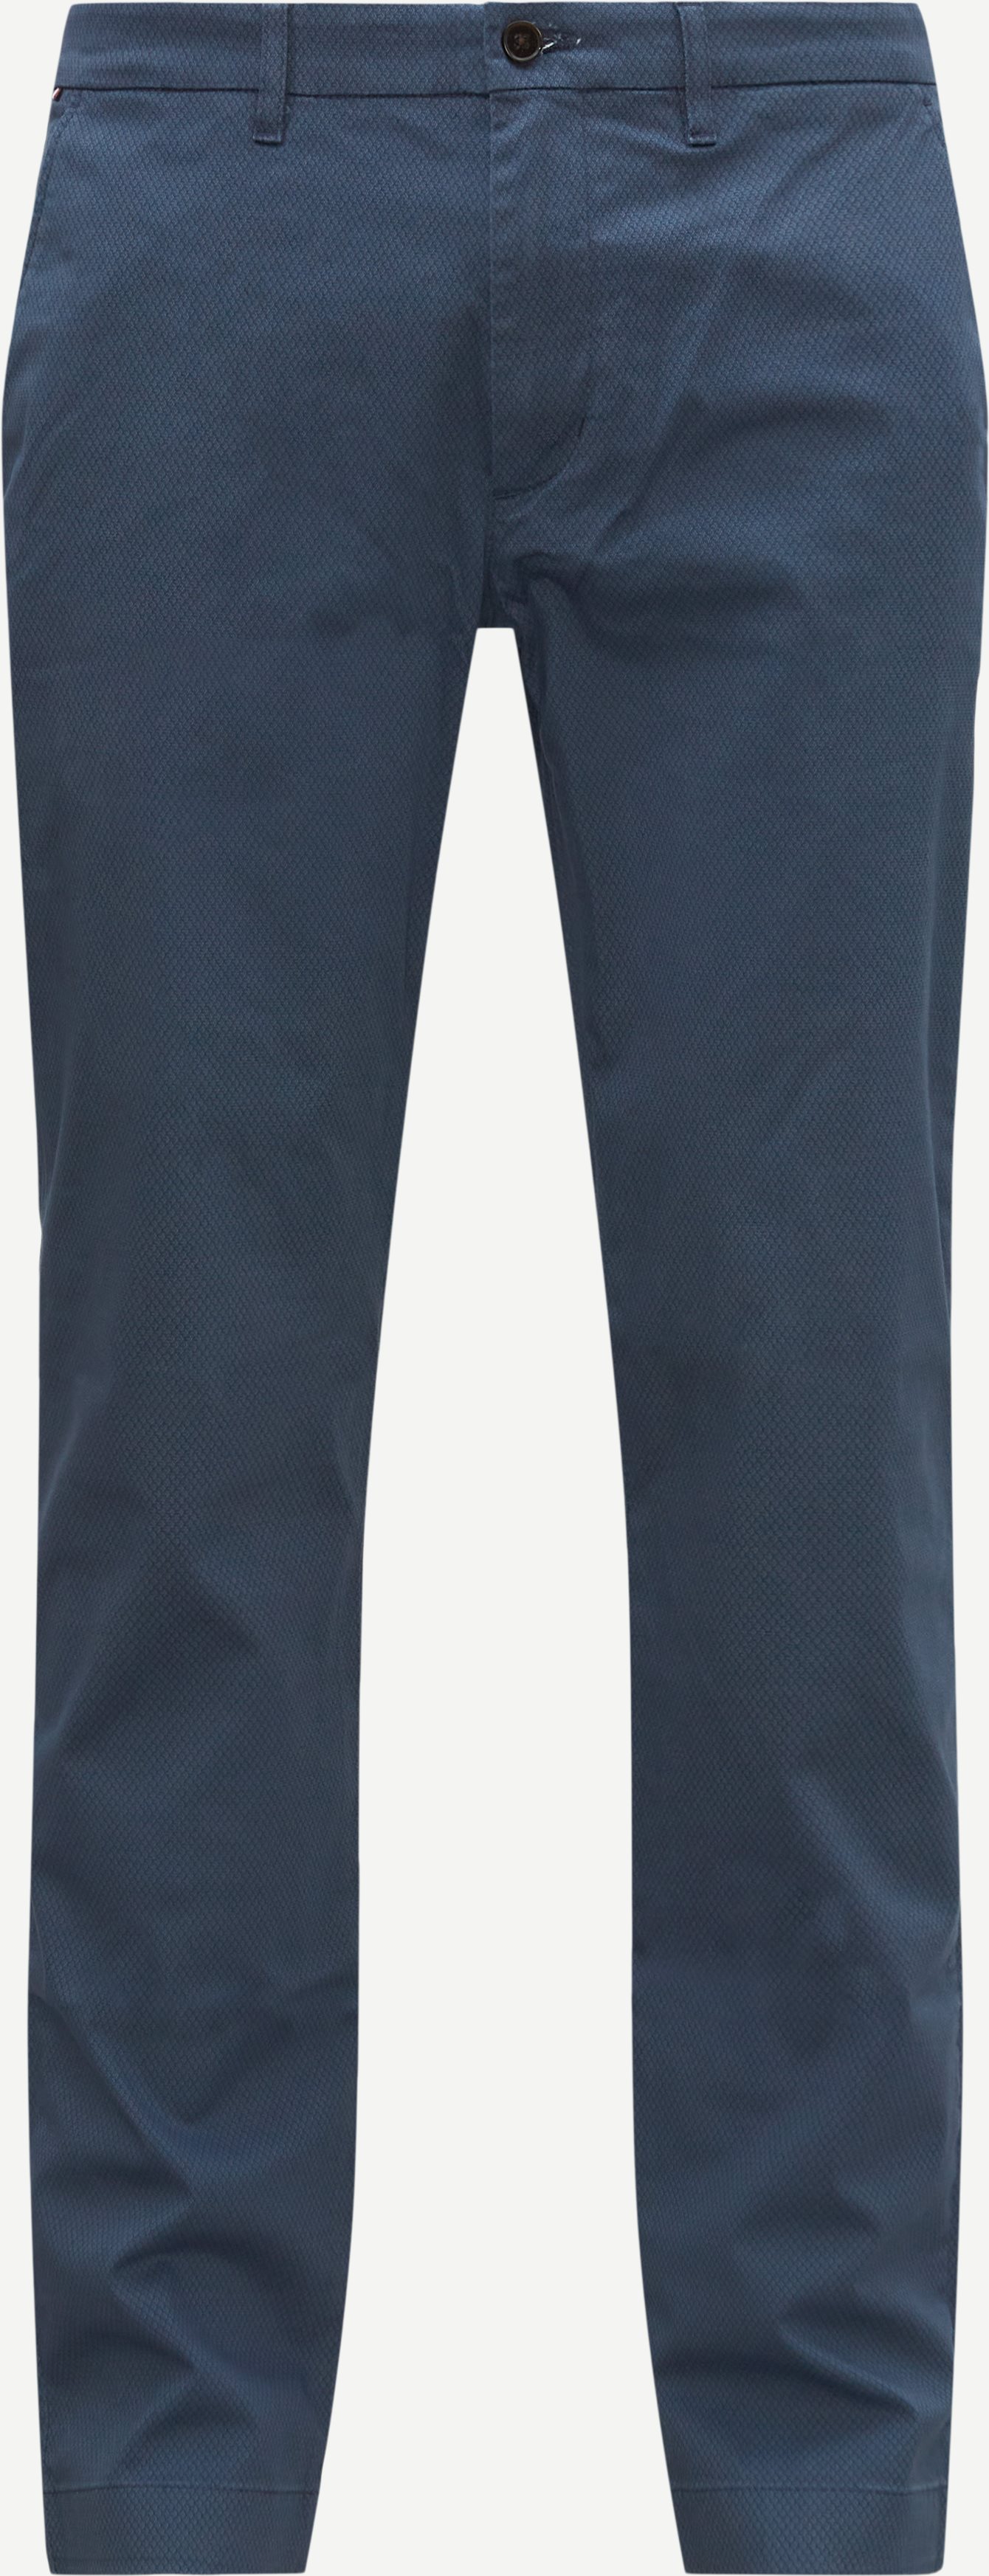 Tommy Hilfiger Trousers 31140 DENTON PRINTED STRUCTURE Blue